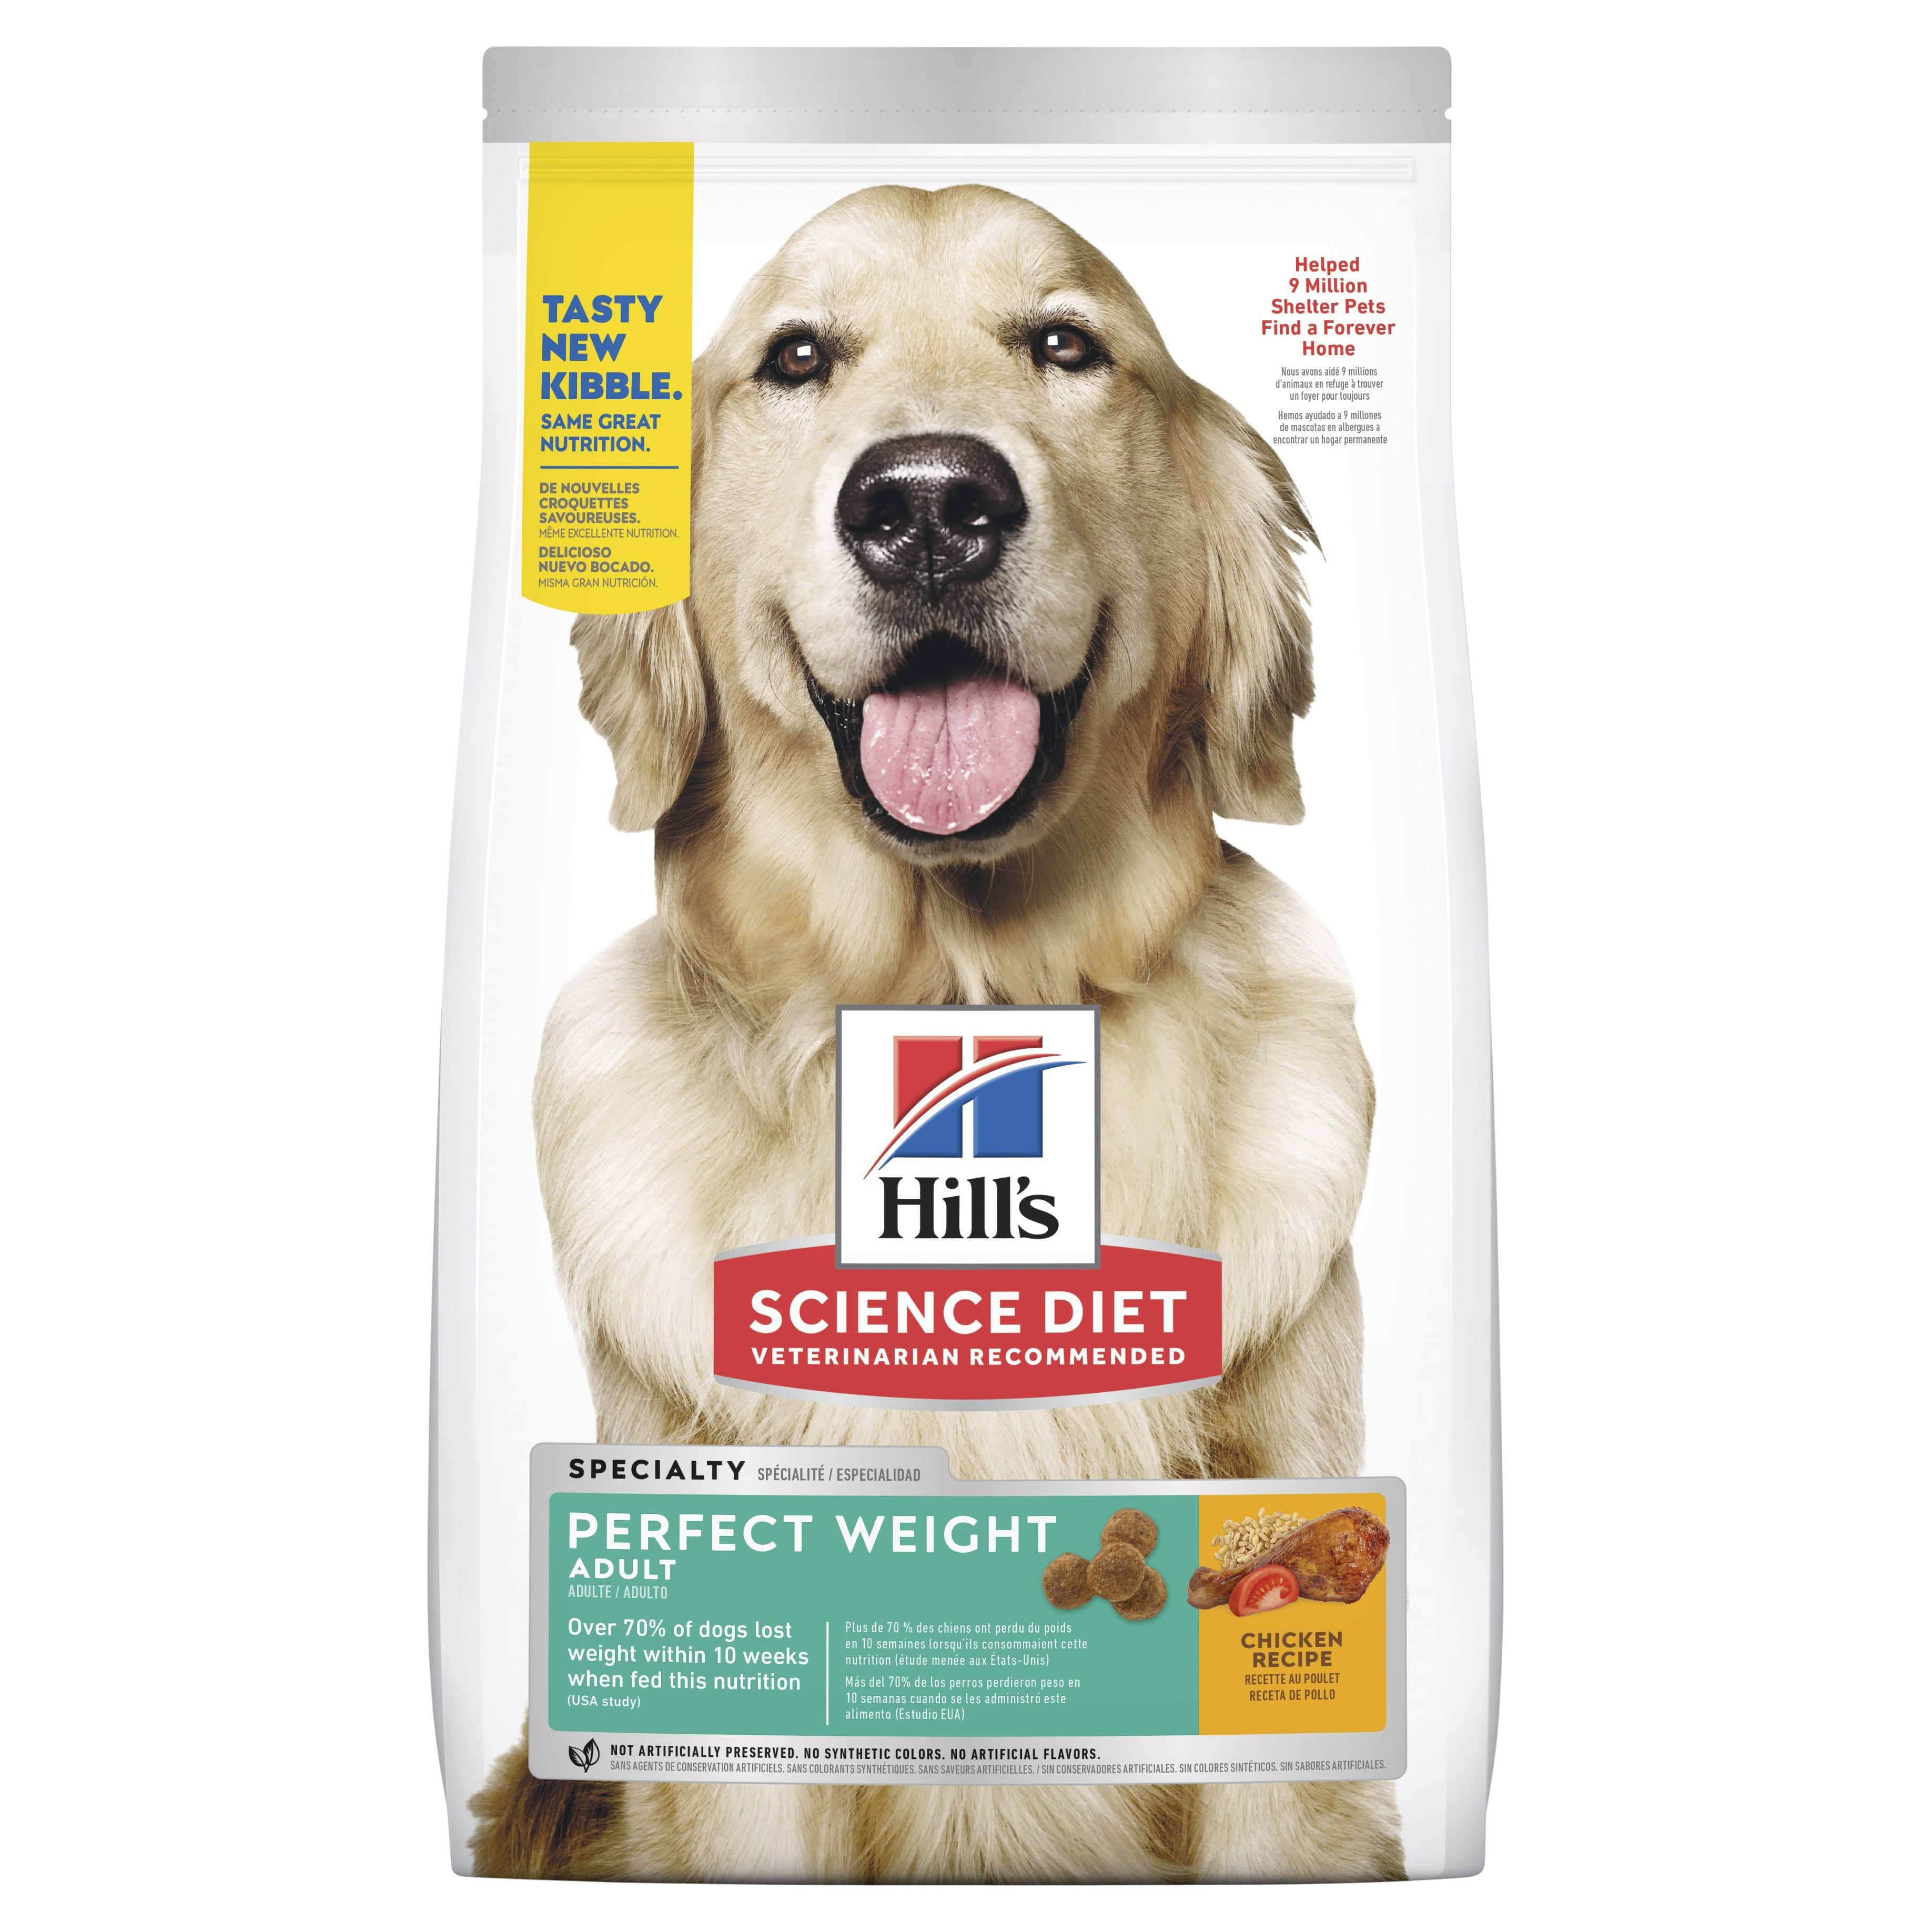 Hill's Science Diet Premium Natural Dog Food - Adult, Chicken Recipe, 4lb.bag